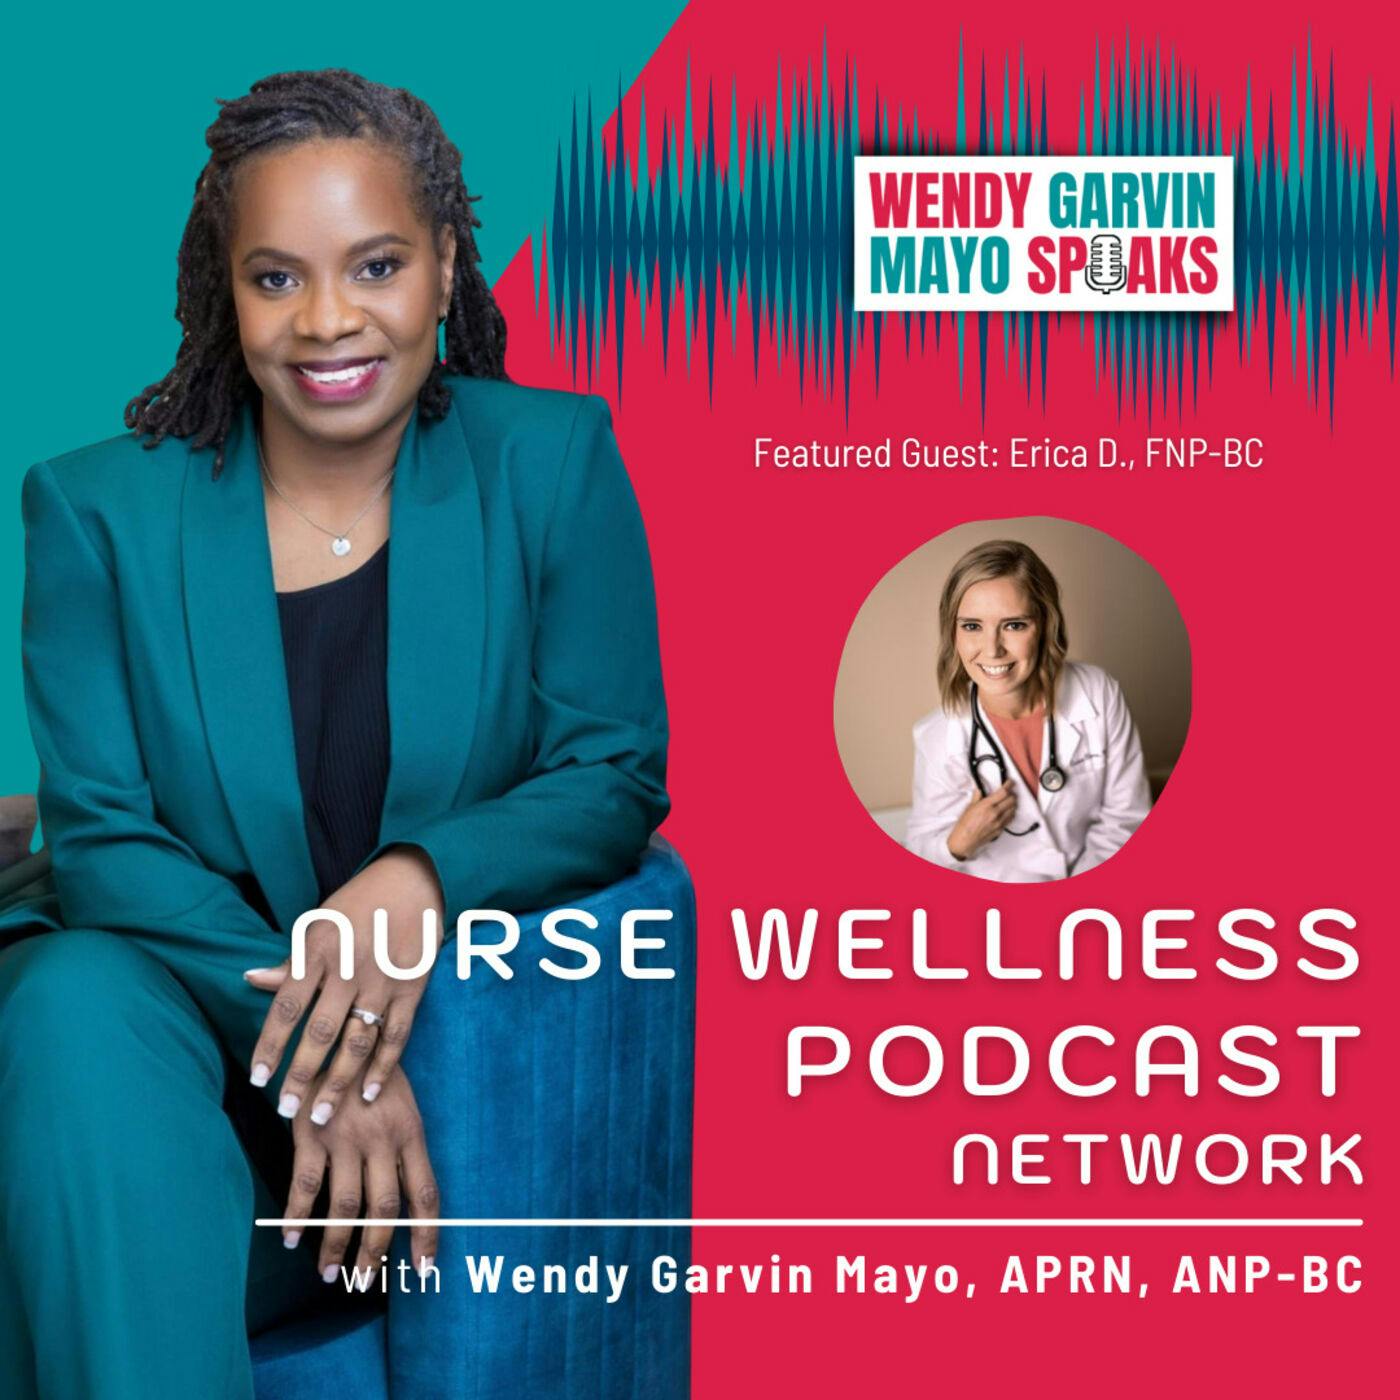 Are You Currently in a Burnout State? Wendy with Erica D. FNP-BC